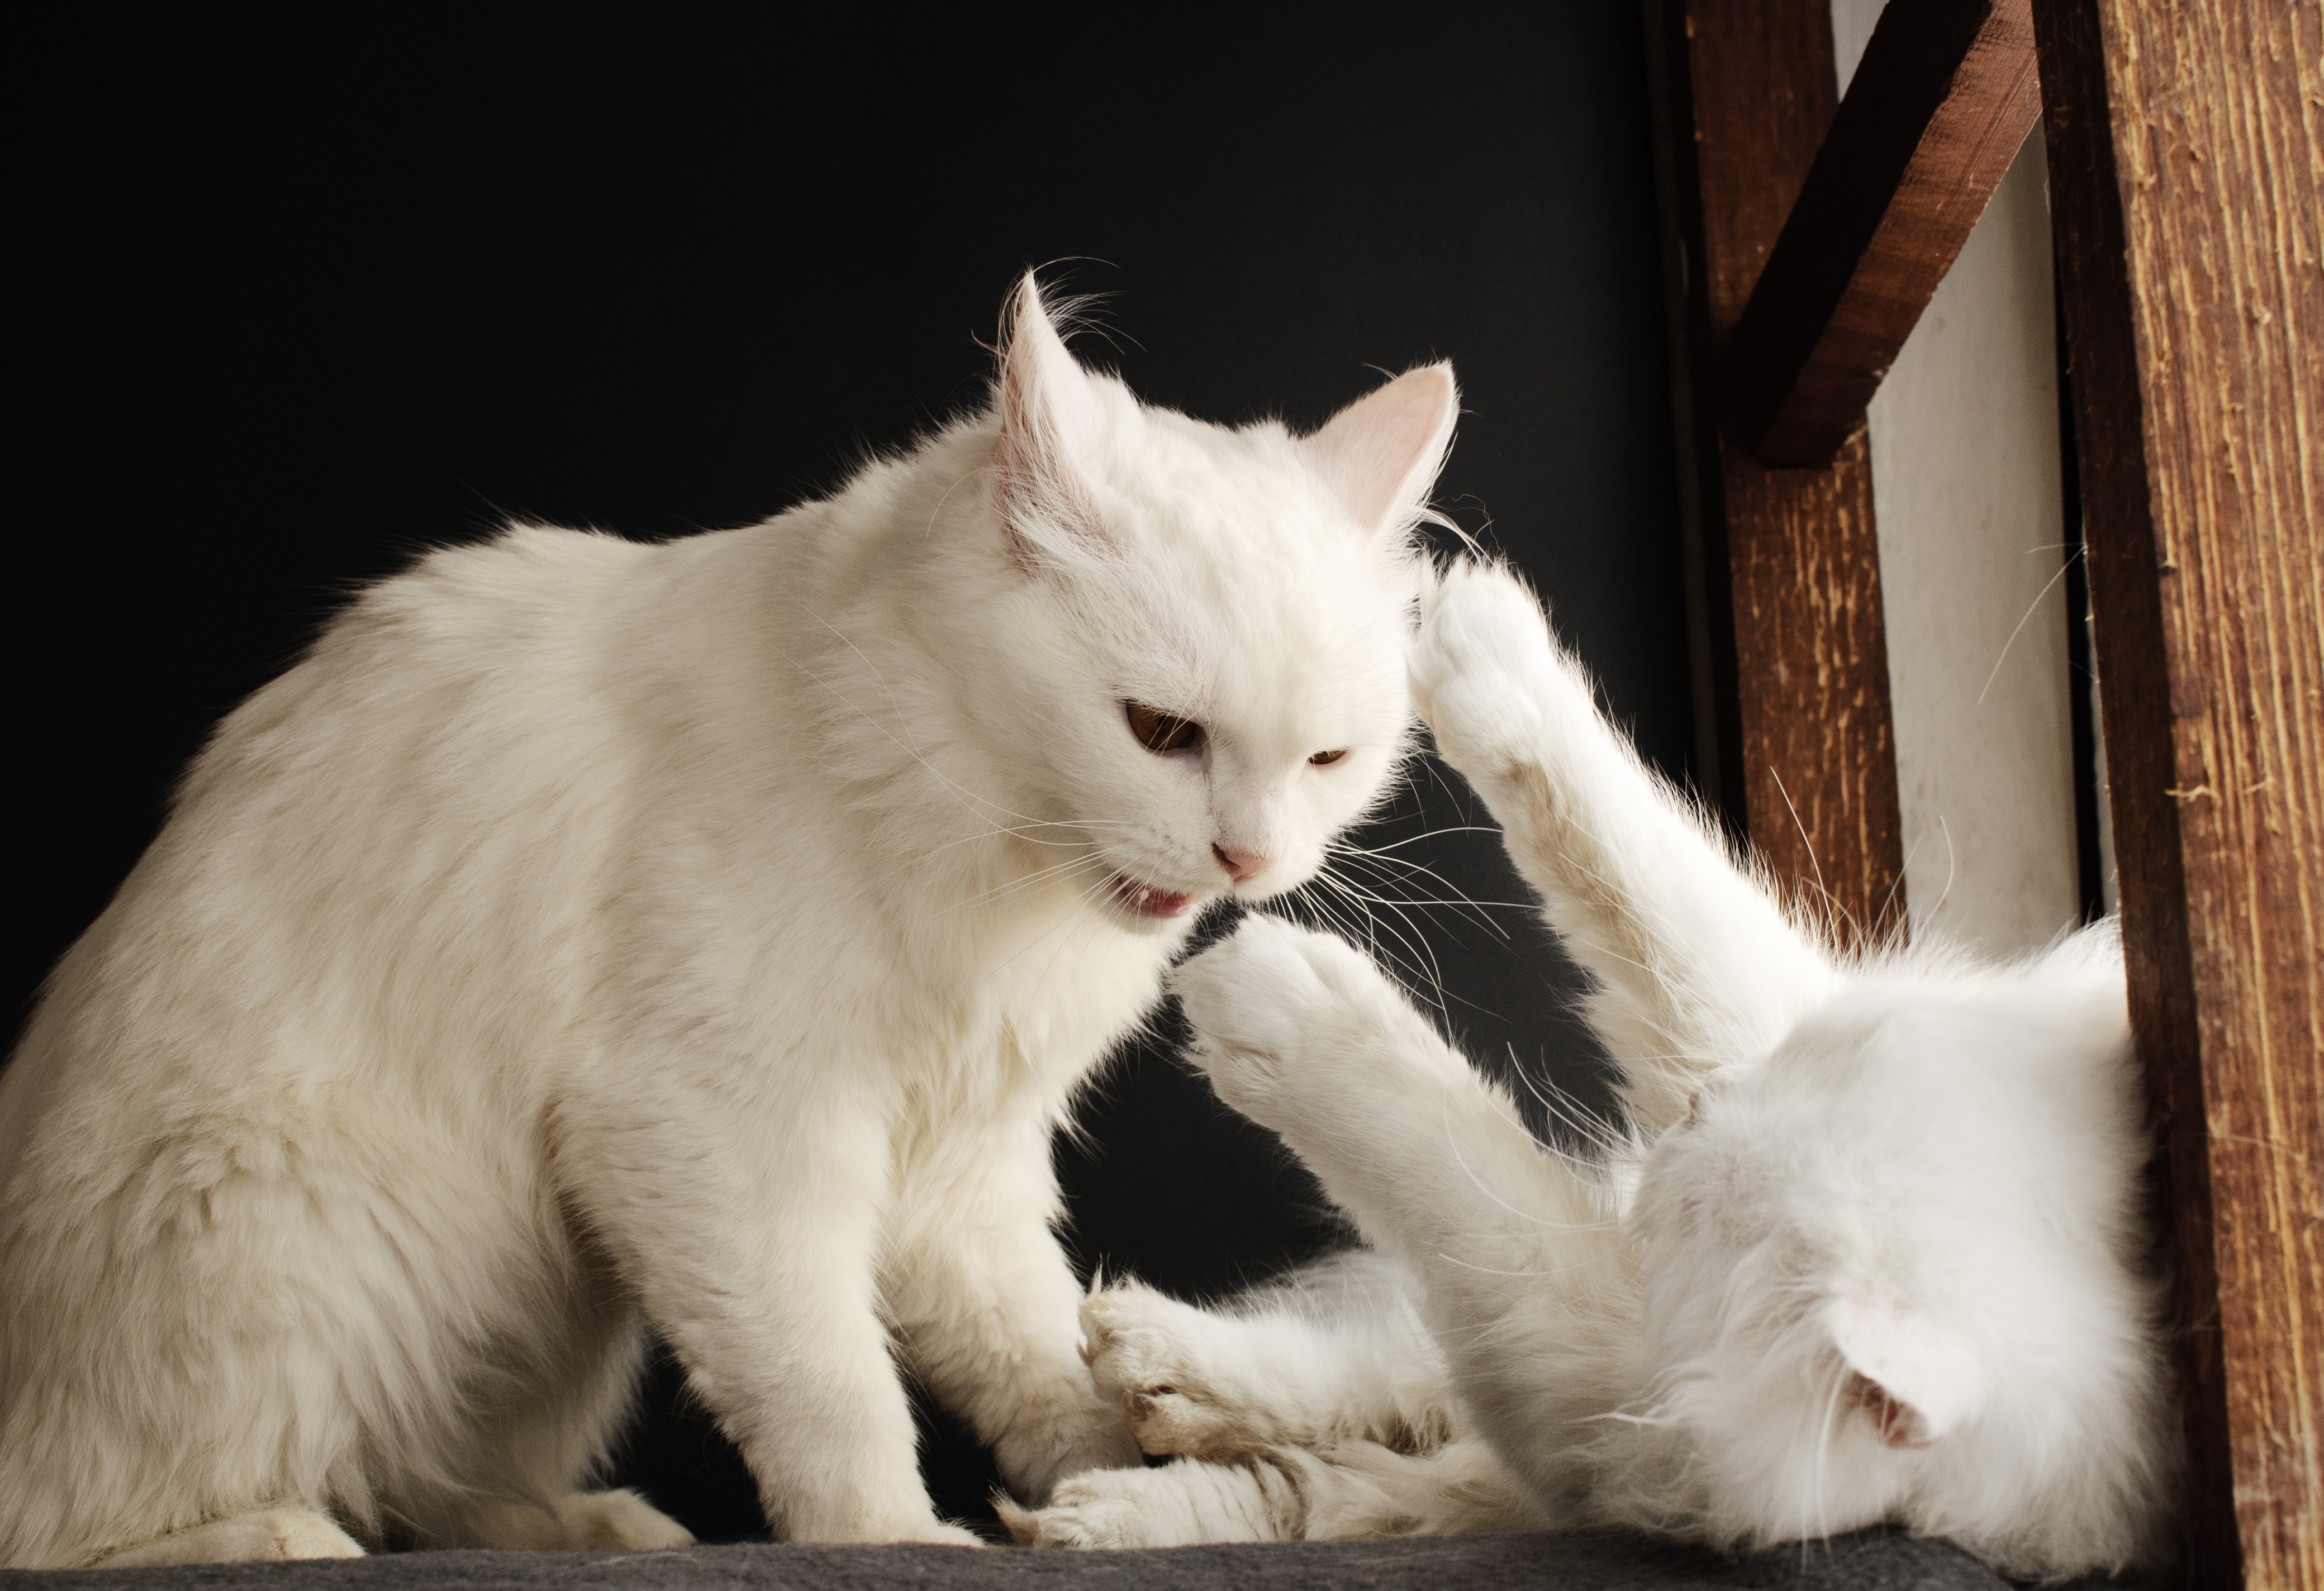 White cat showing dominance over another cat